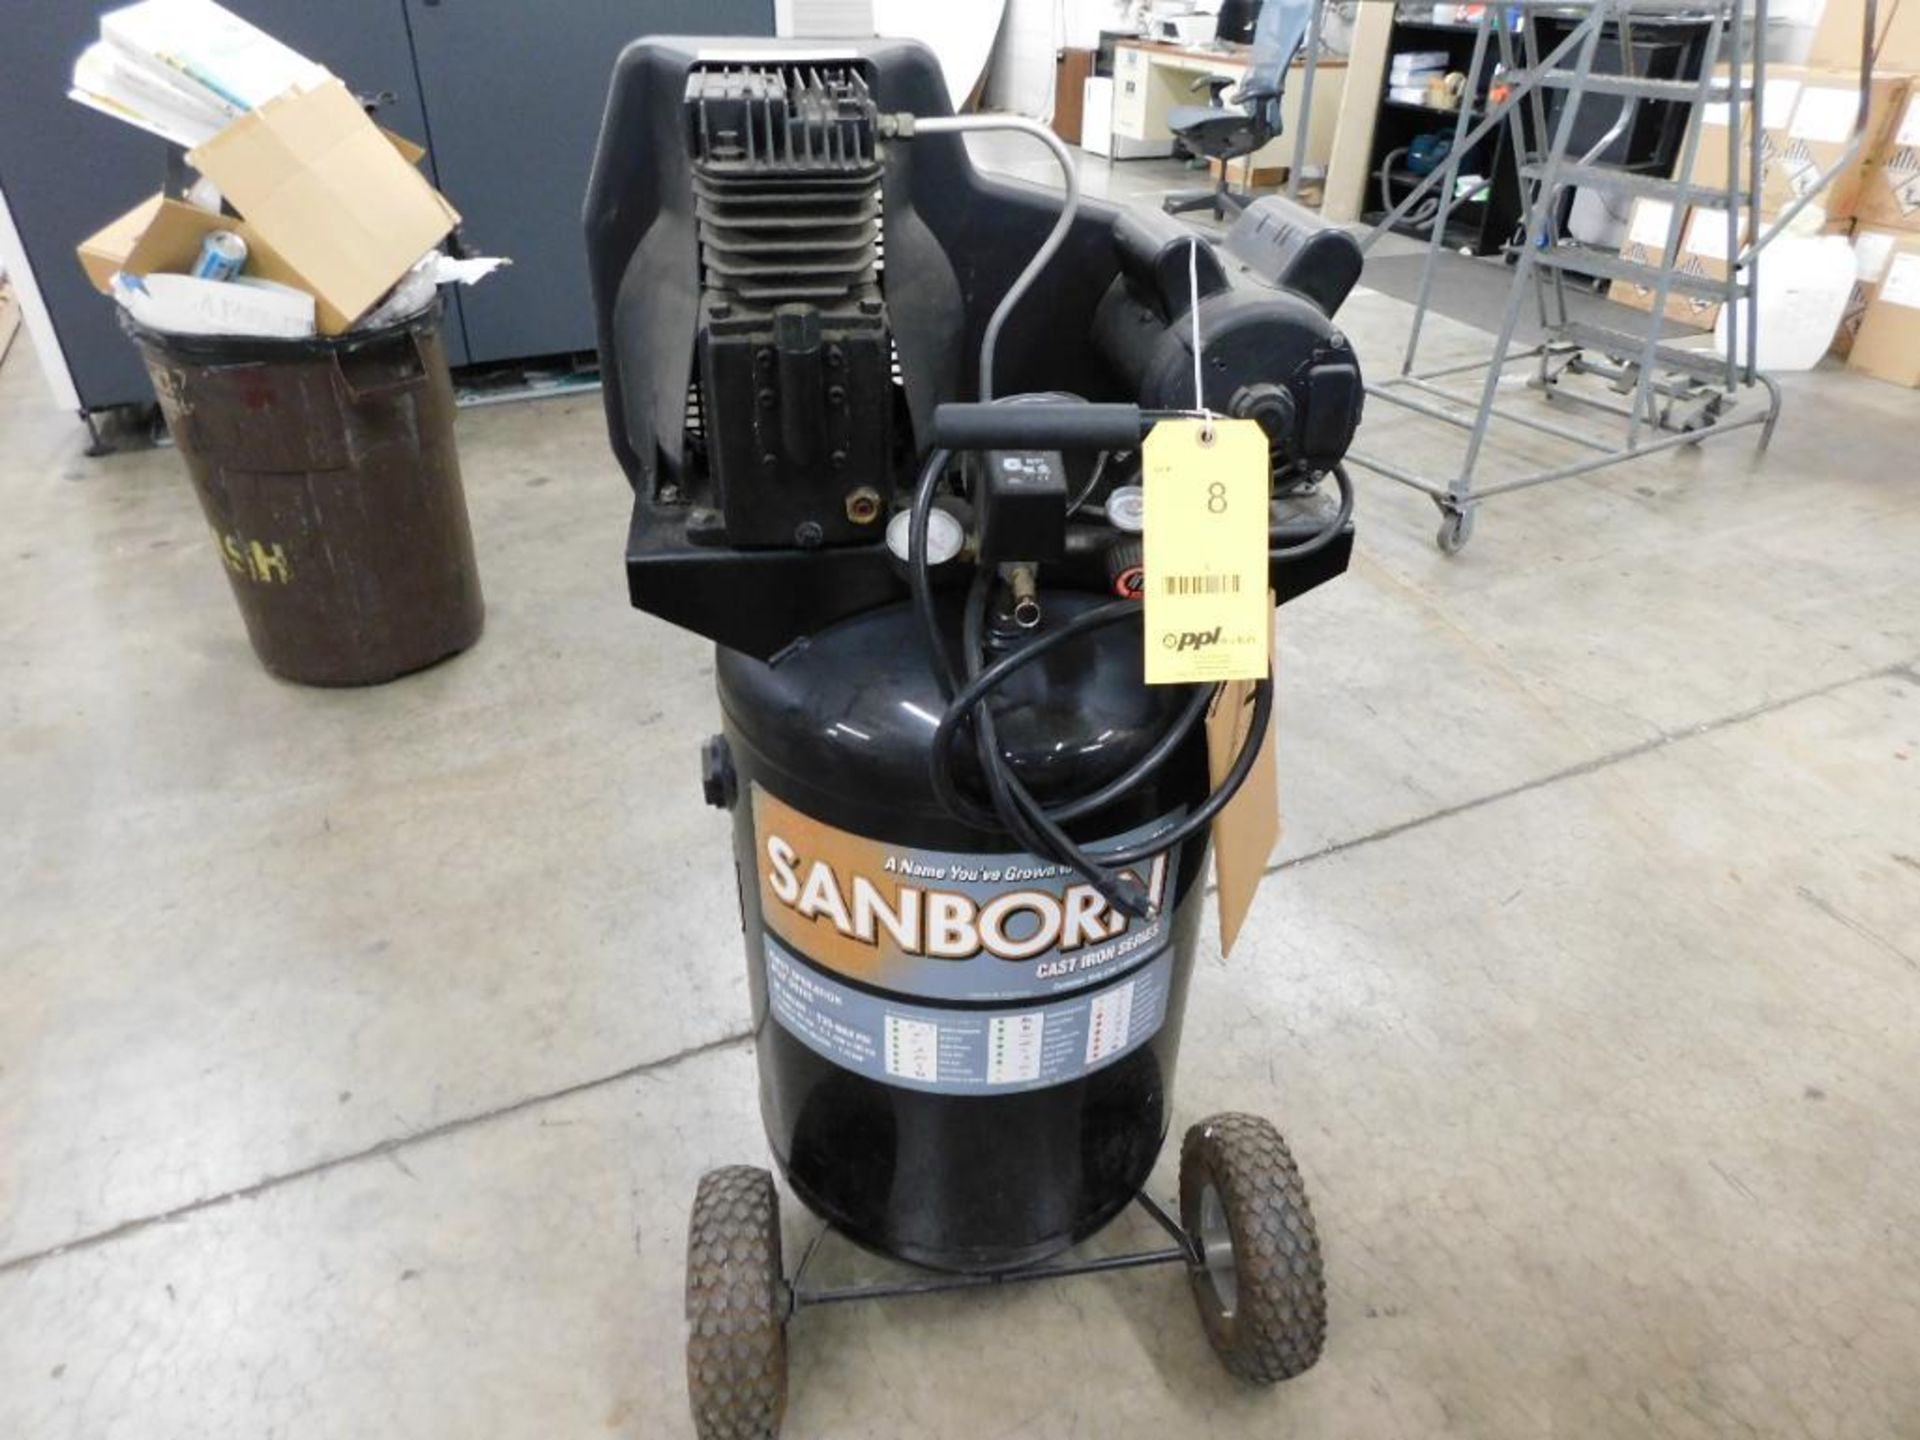 Sanborn 1.9 HP Vertical Tank Mounted Compressor, Model SL1983054 - DELAYED REMOVAL, CONTACT SITE MAN